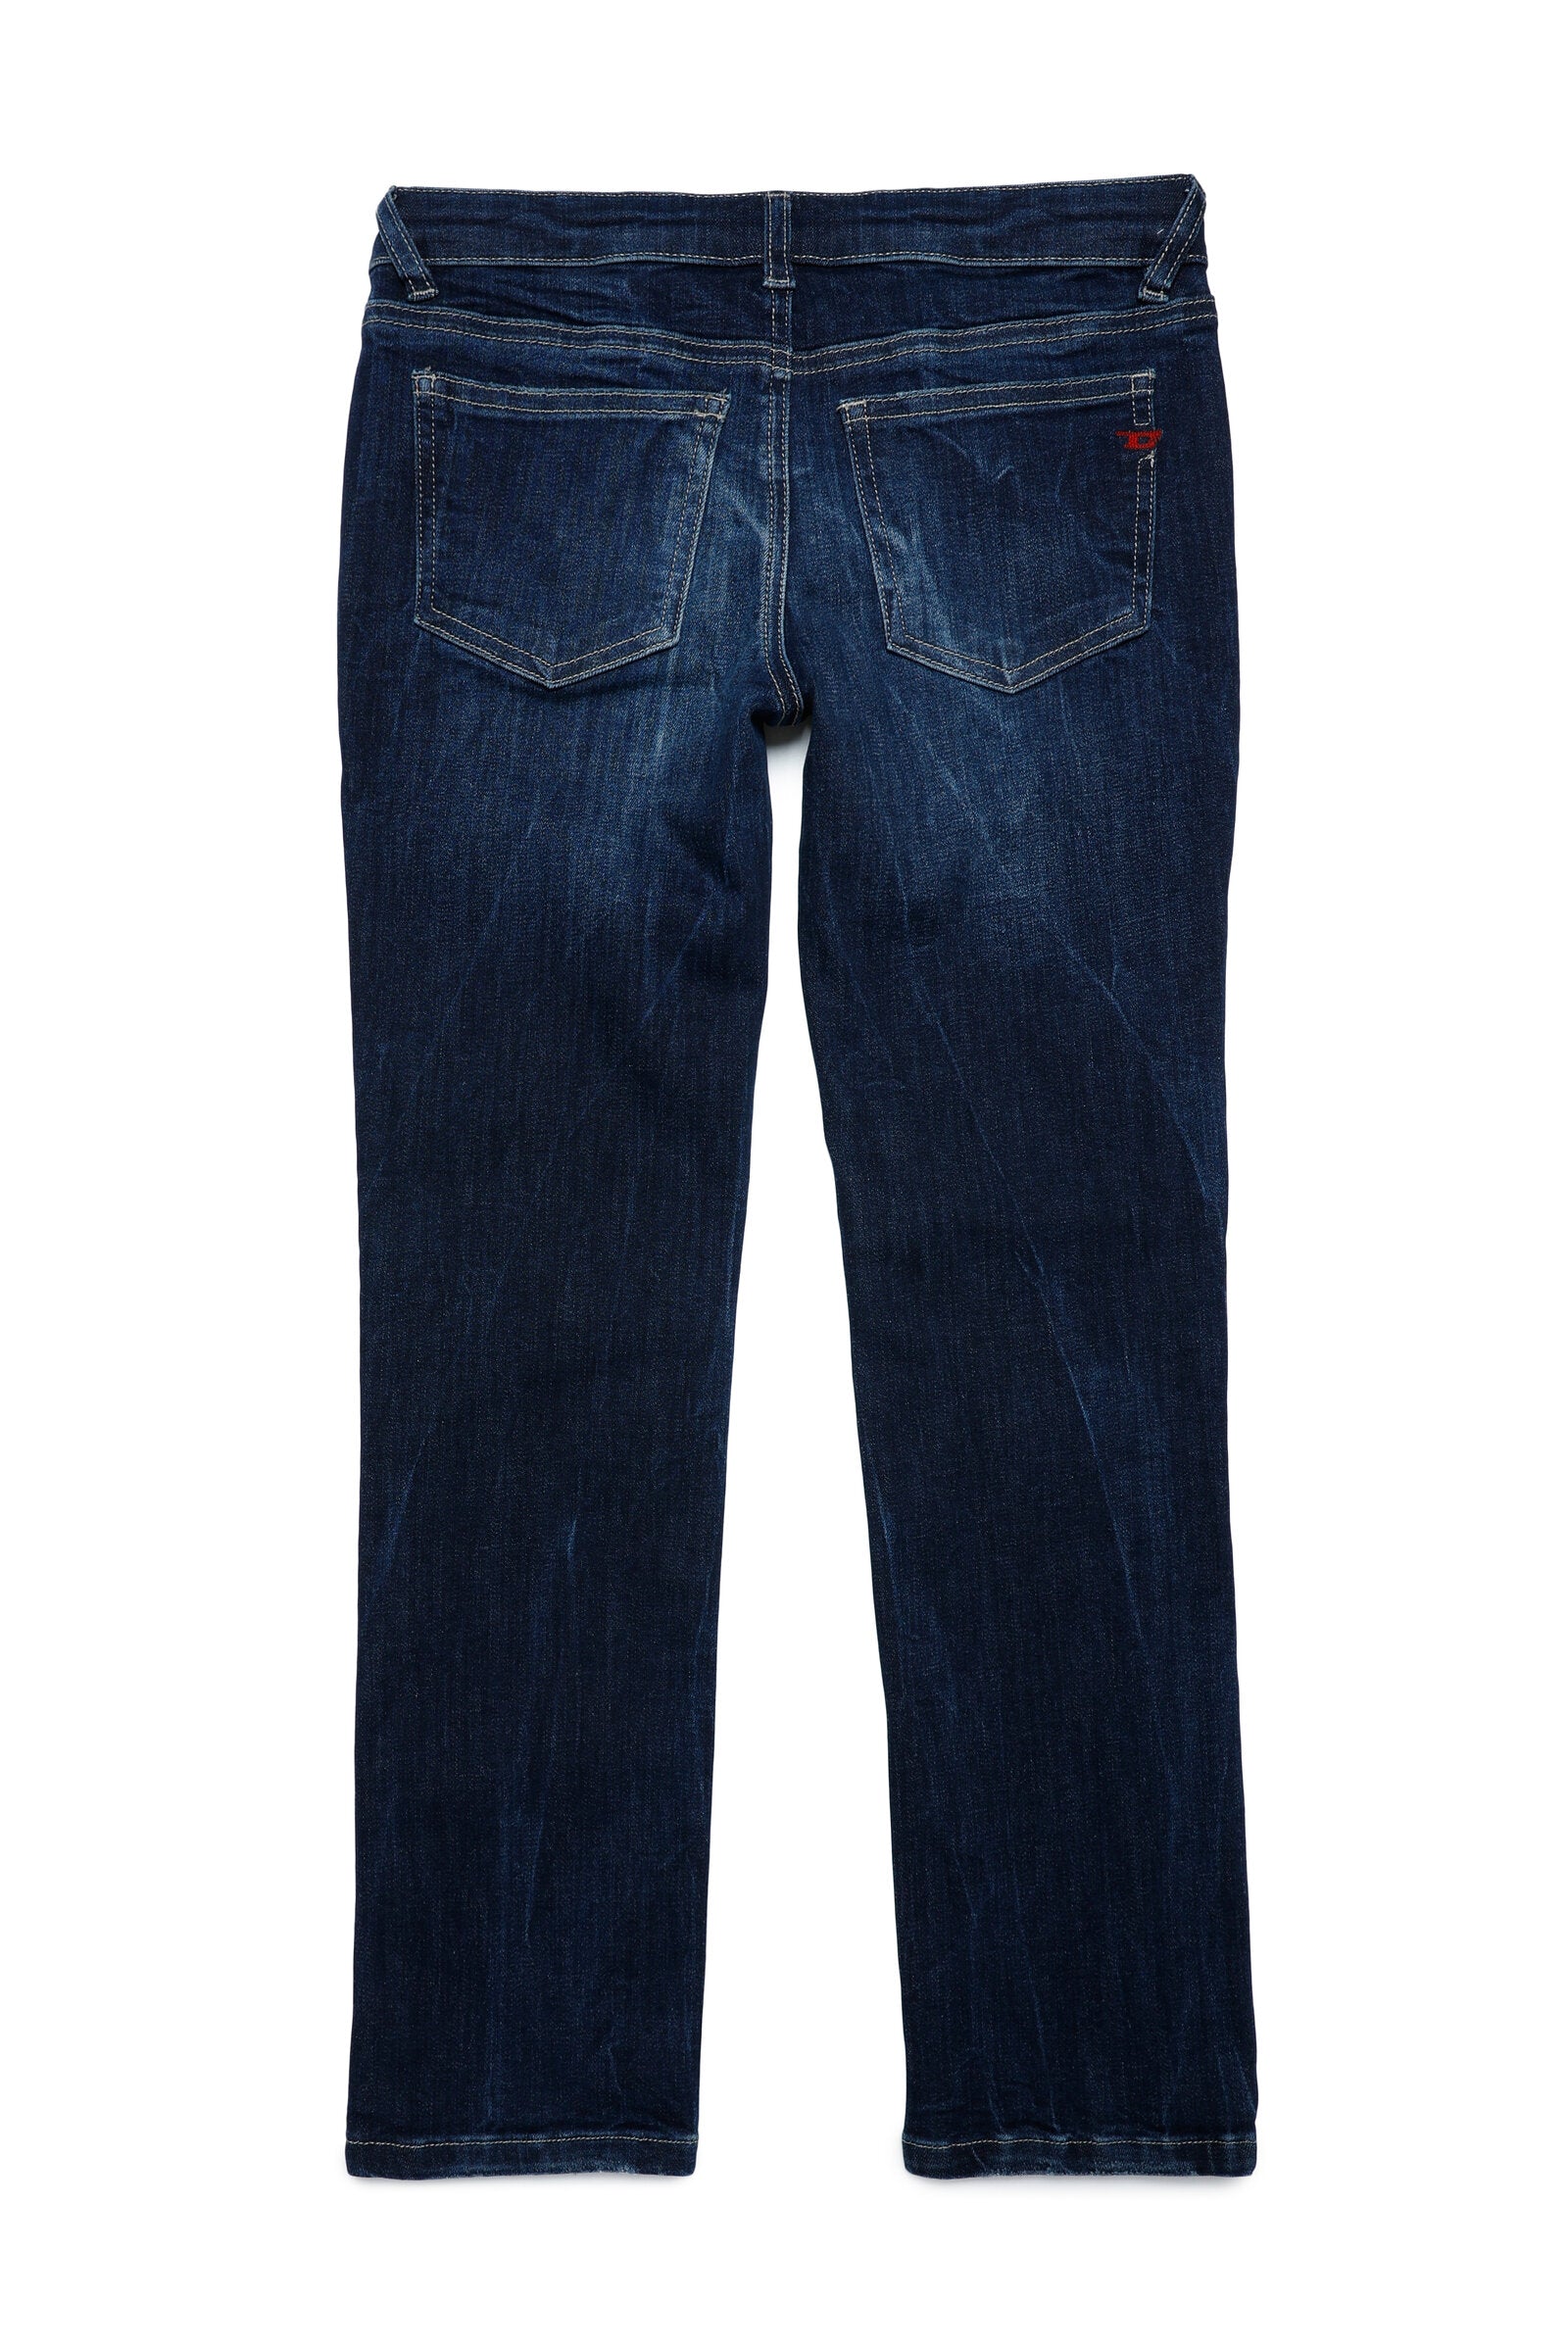 Jeans 2002 straight dark blue shaded jeans